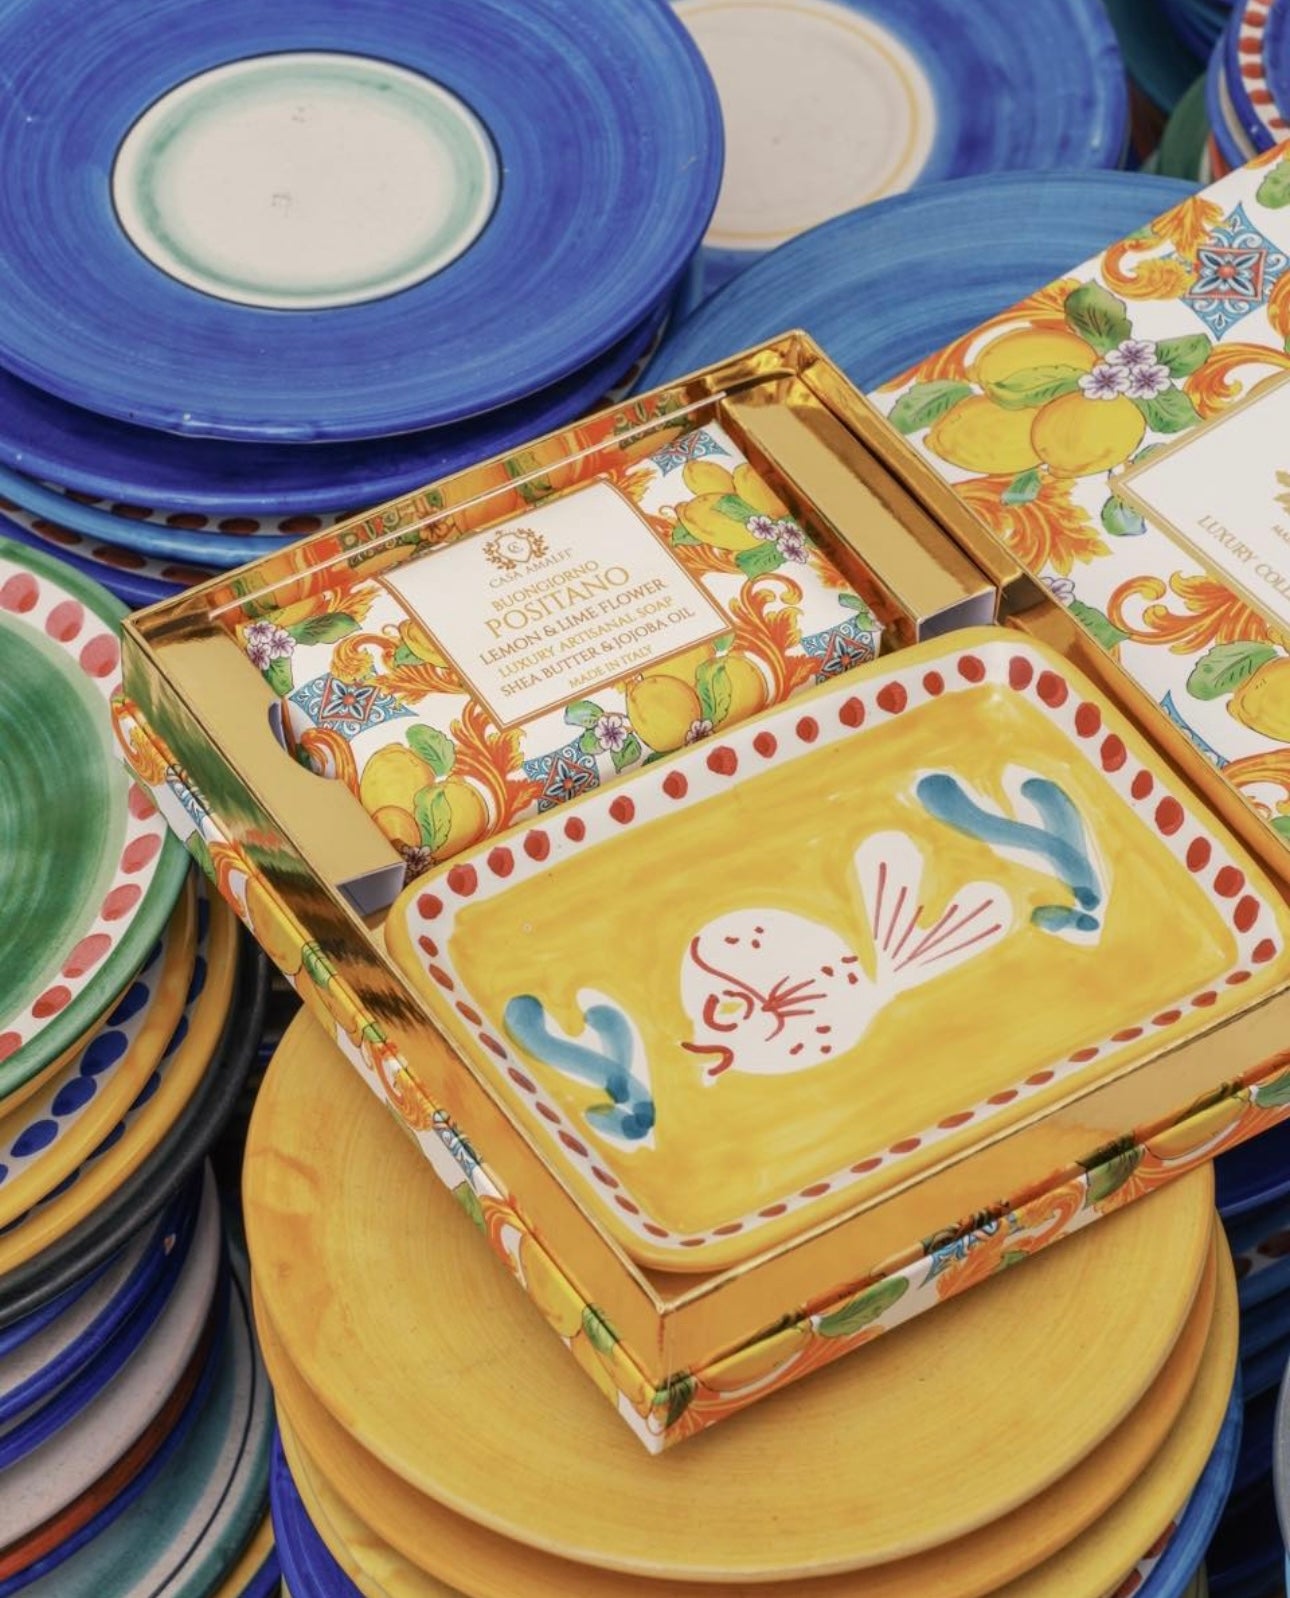 Positano Luxury Artisan Soap and Hand-Painted Plate Gift Box